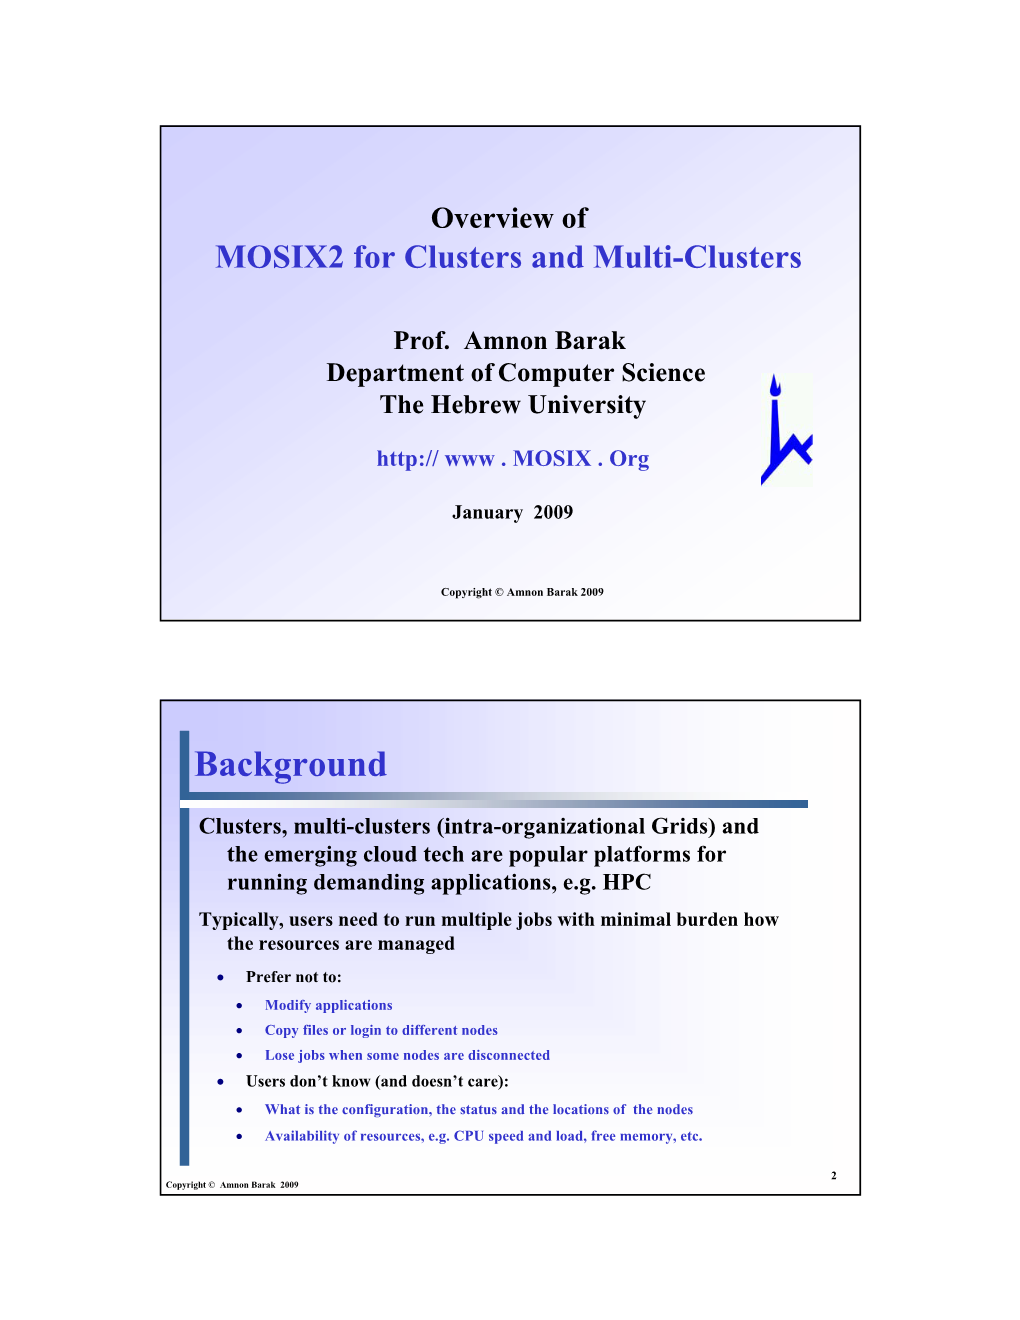 Overview of MOSIX2 for Clusters and Multi-Clusters